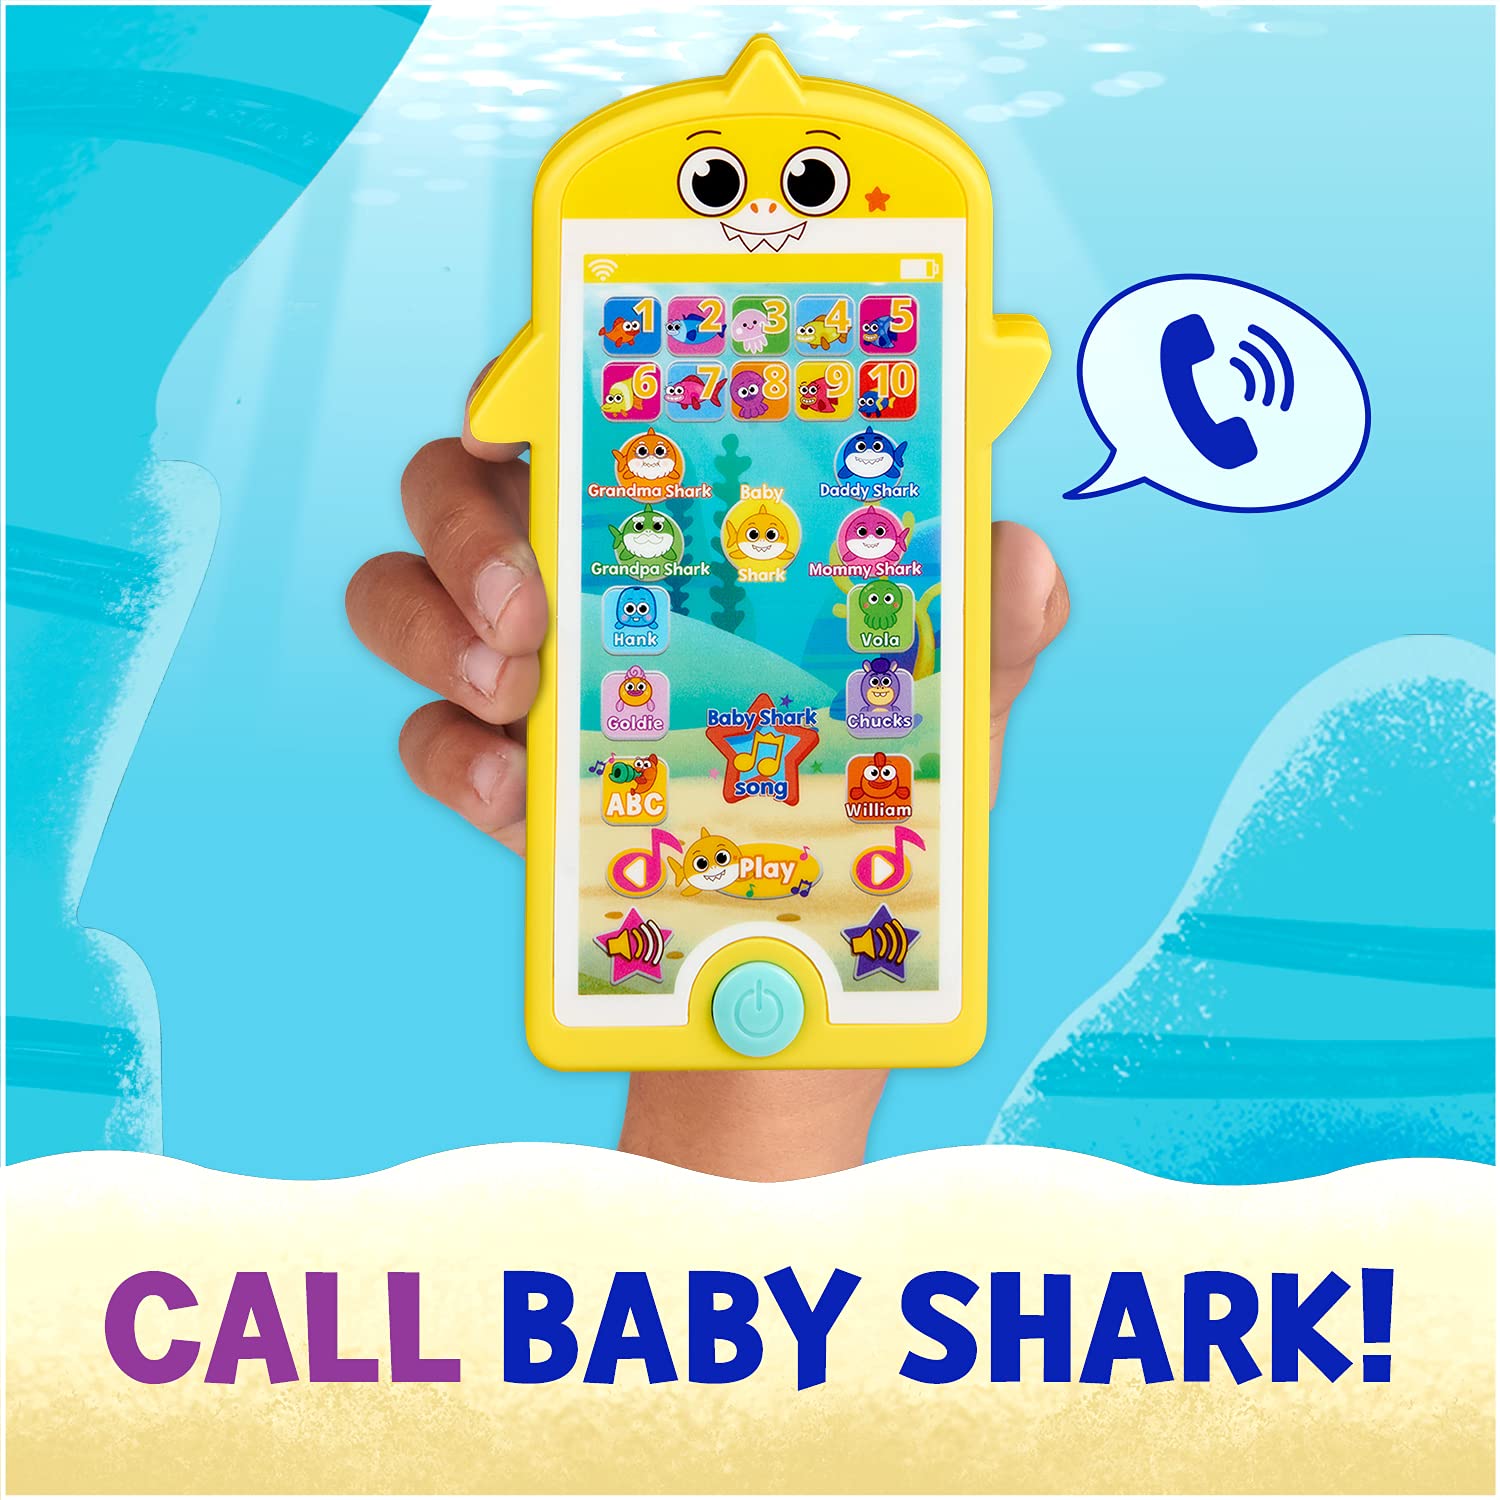 WowWee Baby Shark's Big Show! Mini Tablet for Kids – 123 and ABC Learning Toys for Toddlers – Kids Tablets (Handheld)